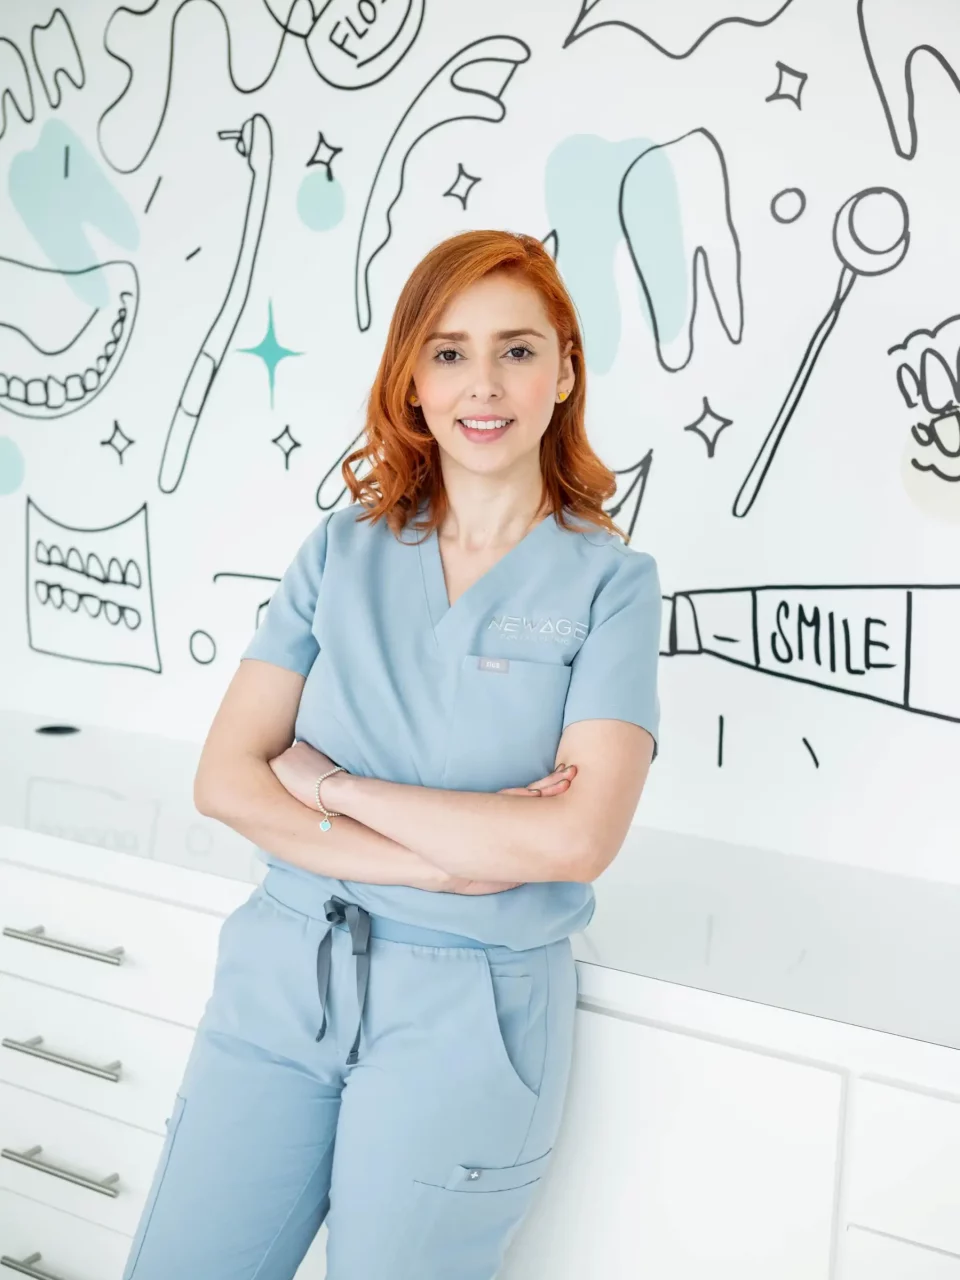 A woman in blue scrubs standing in front of a wall with doodles on it, representing a dental professional specializing in oral surgery.